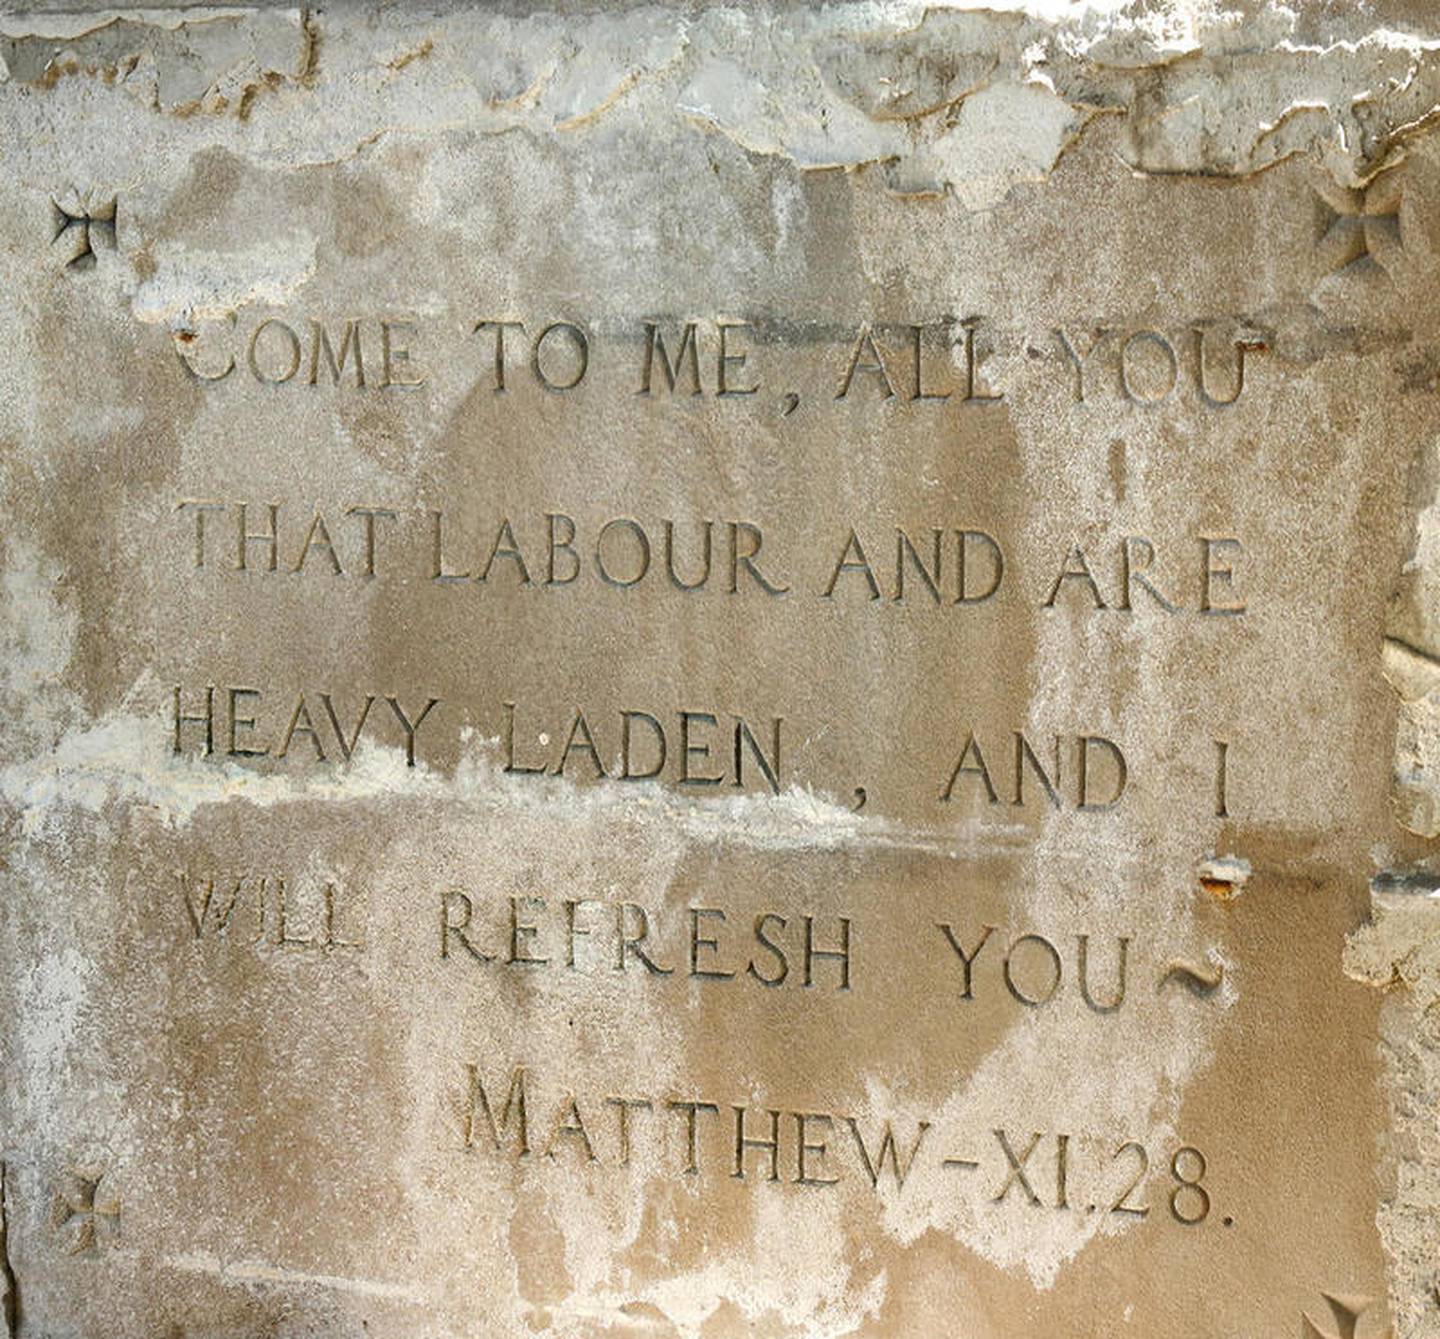 Scripture etched into the old St. Mary's Hospital building at 145 Fisk Ave. in DeKalb Tuesday July 10, 2018. The building served as a hospital after its construction in 1922 until 1965, and has also housed office space and was the home to School District 428's administration until 1992.